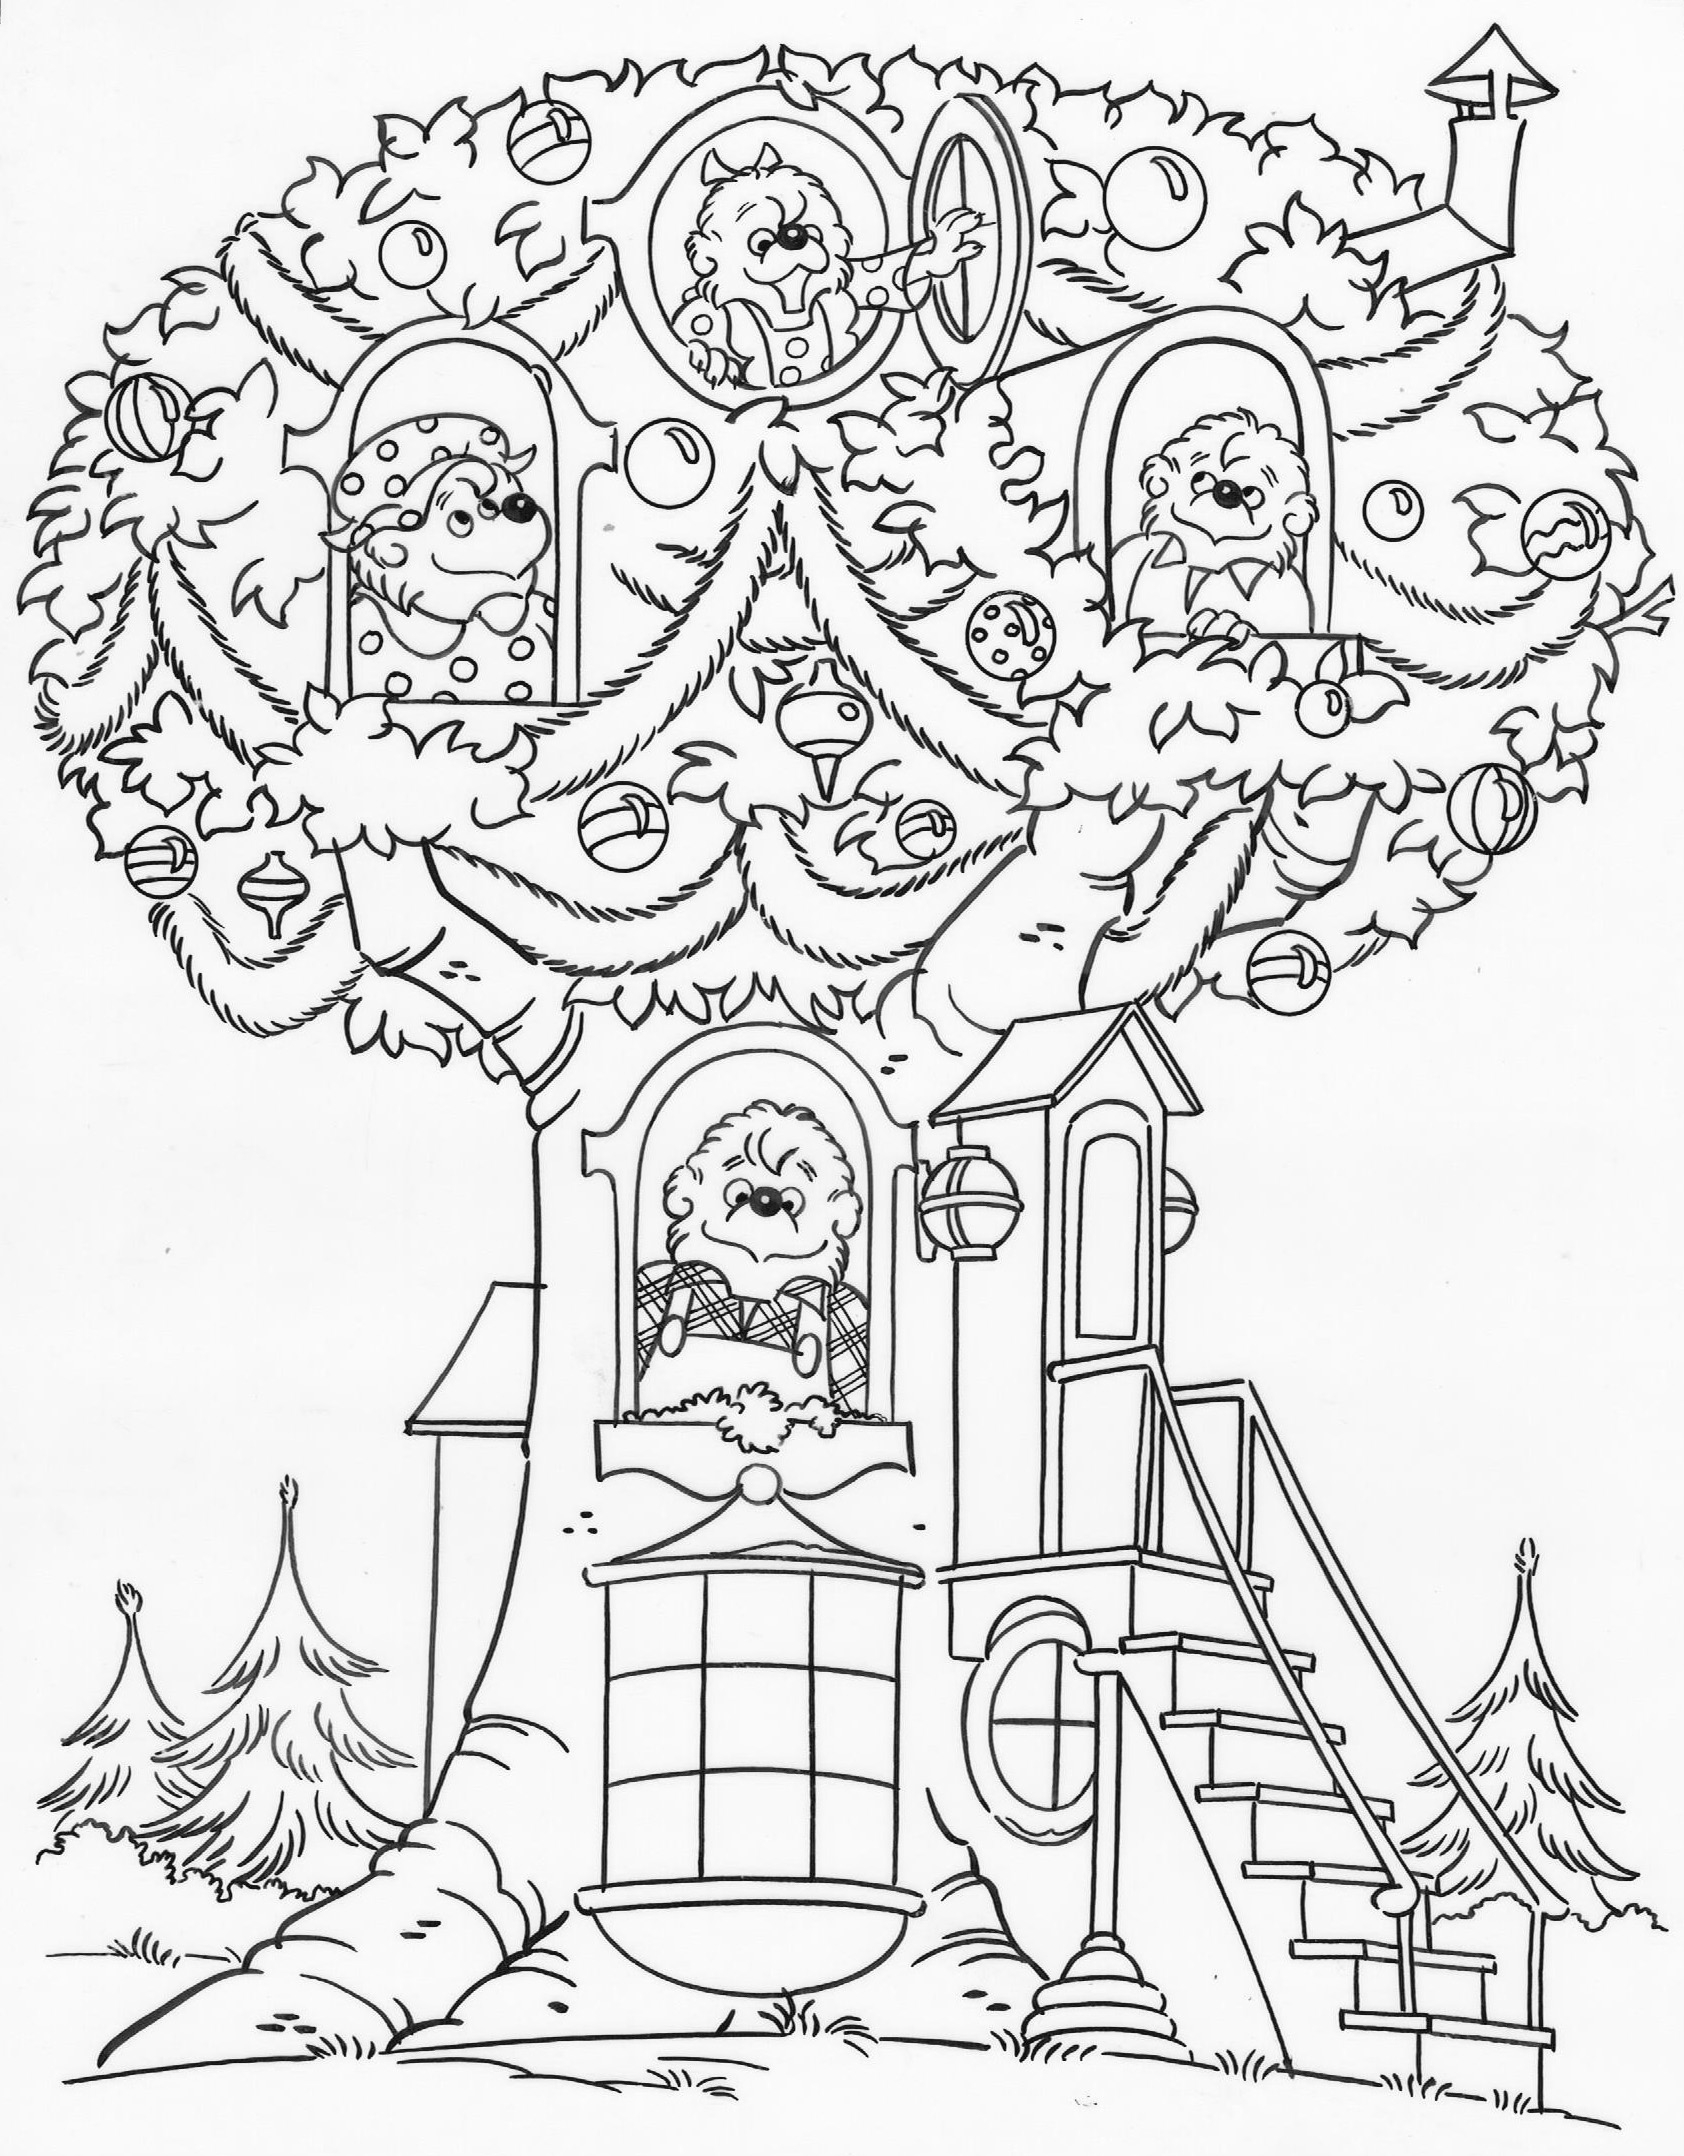 Bears Coloring Pages Berenstain Bears Coloring Pages At Getdrawings Free For